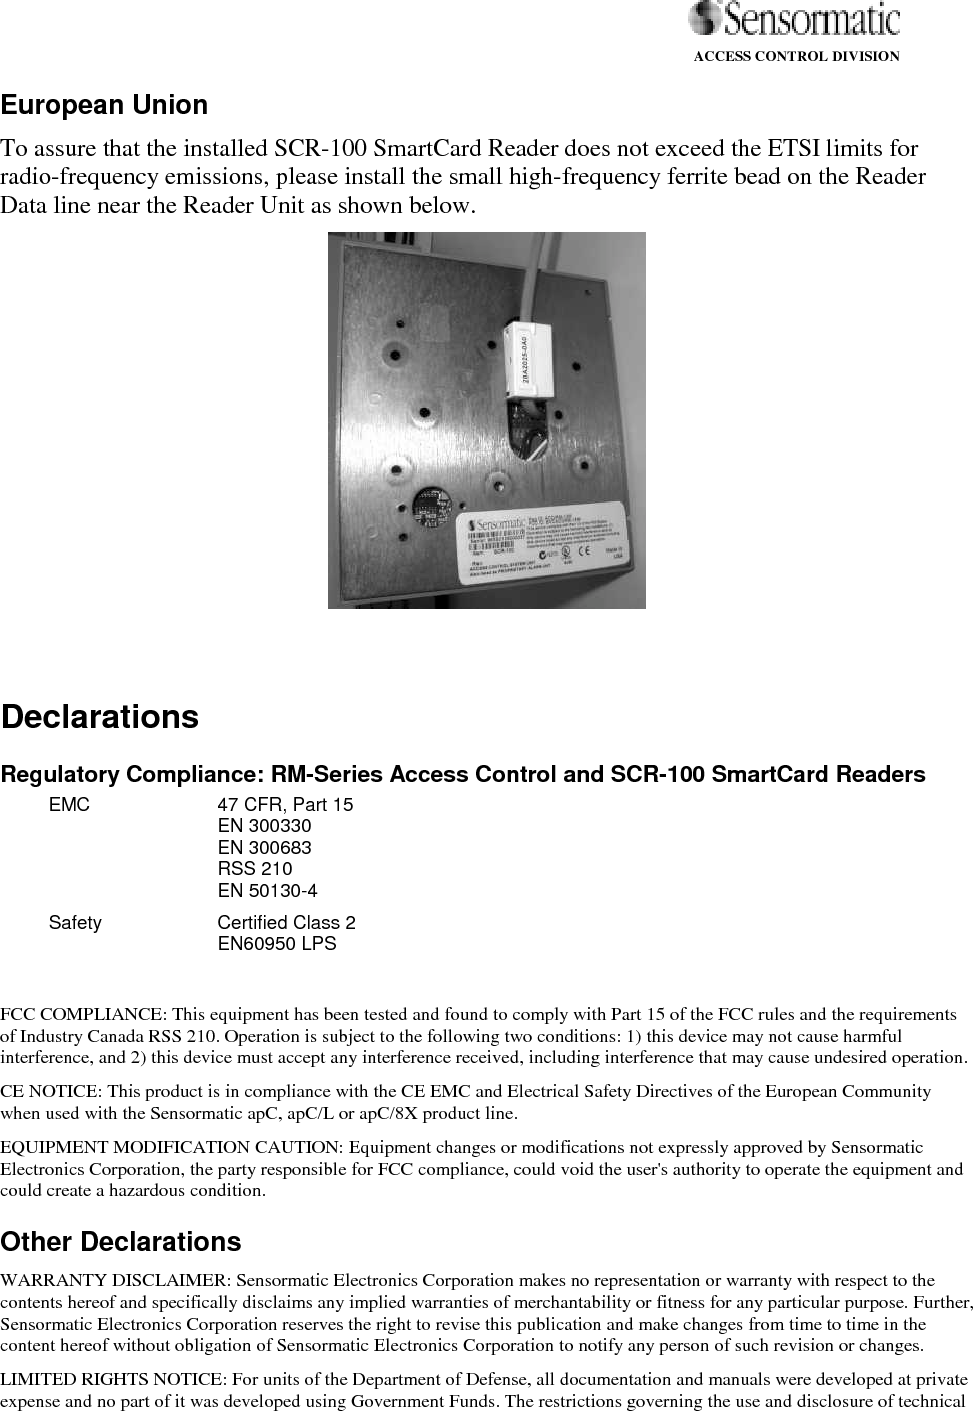                                                                                                                   ACCESS CONTROL DIVISION  data marked with this legend are set forth in the definition of &quot;limited rights&quot; in paragraph (a) (15) of the clause of DFARS 252.227.7013. Unpublished - rights reserved under the Copyright Laws of the United States.  